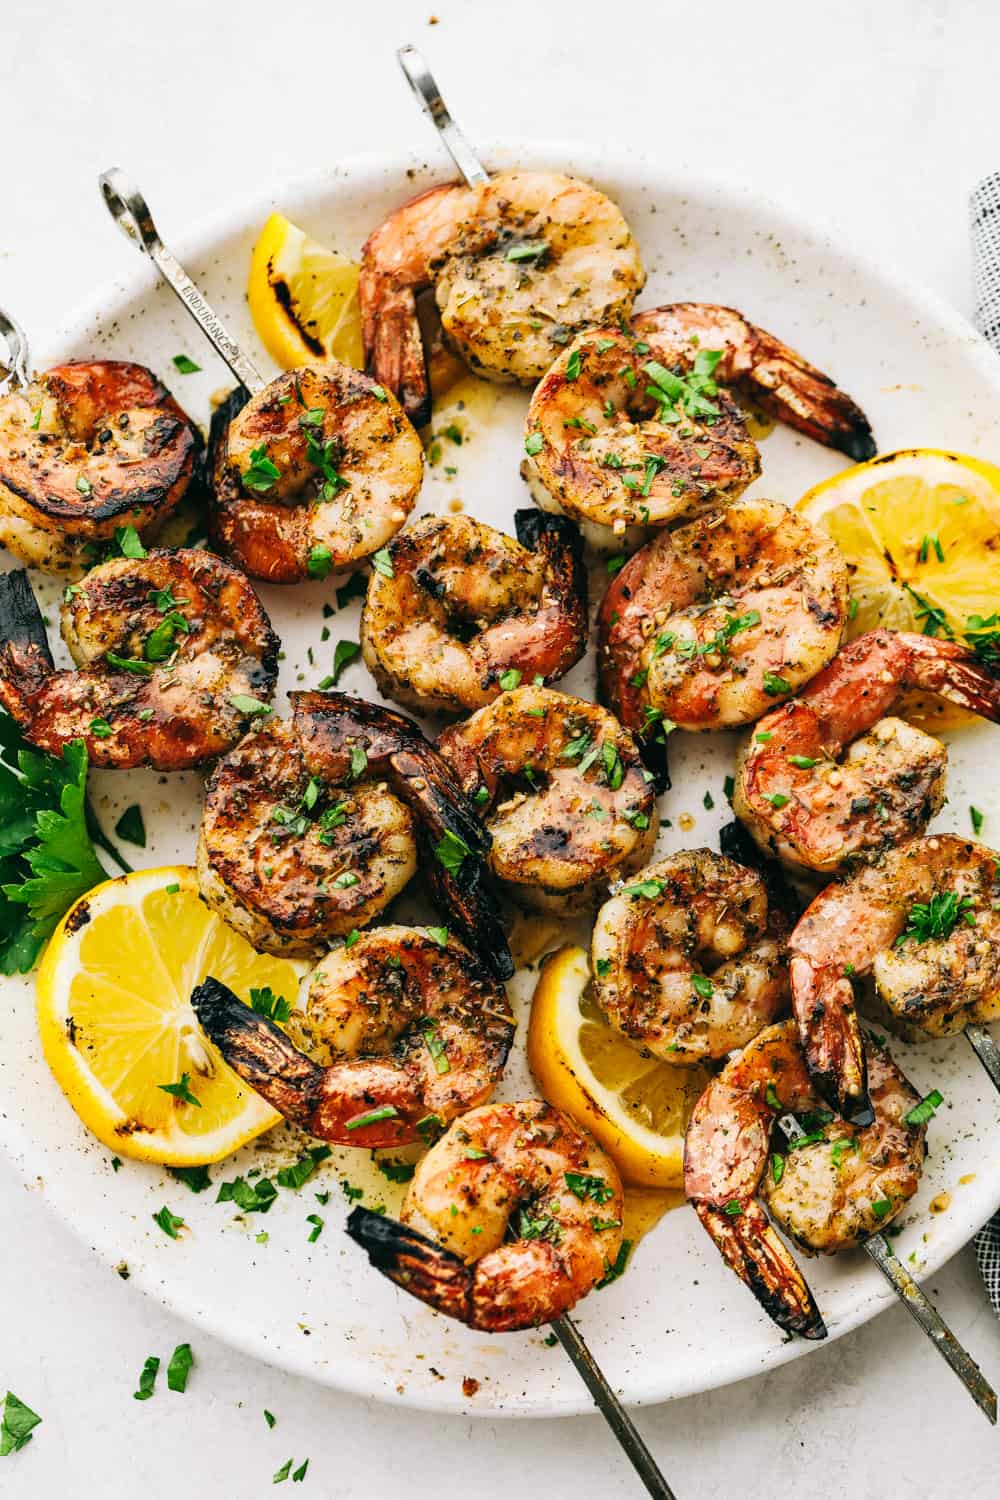 II. Understanding the different techniques of grilling shrimp